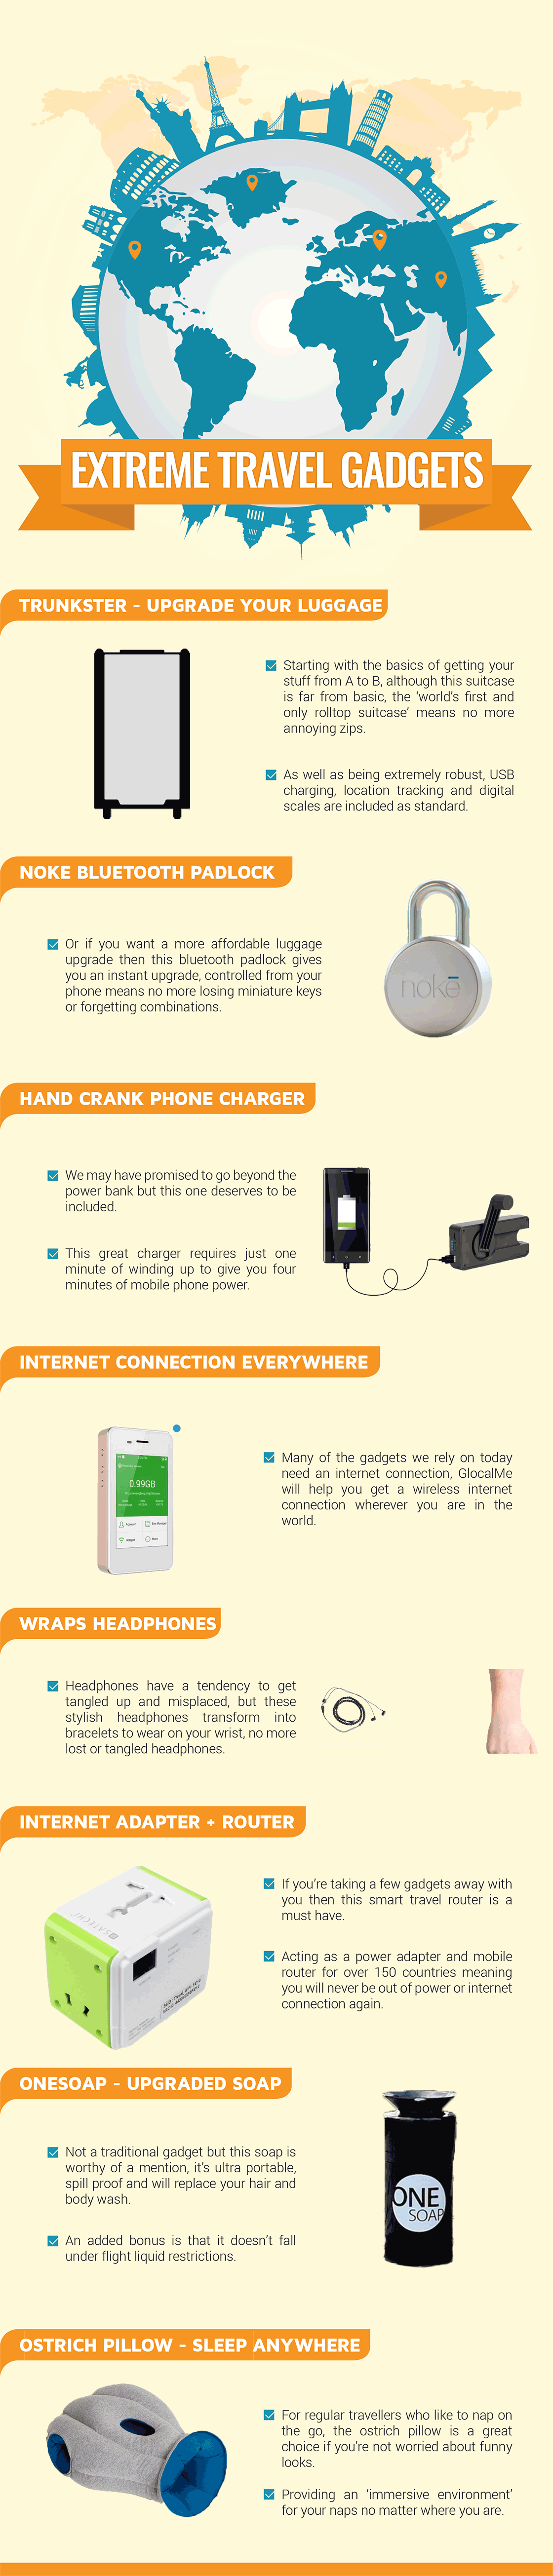 travel gadgets infographic